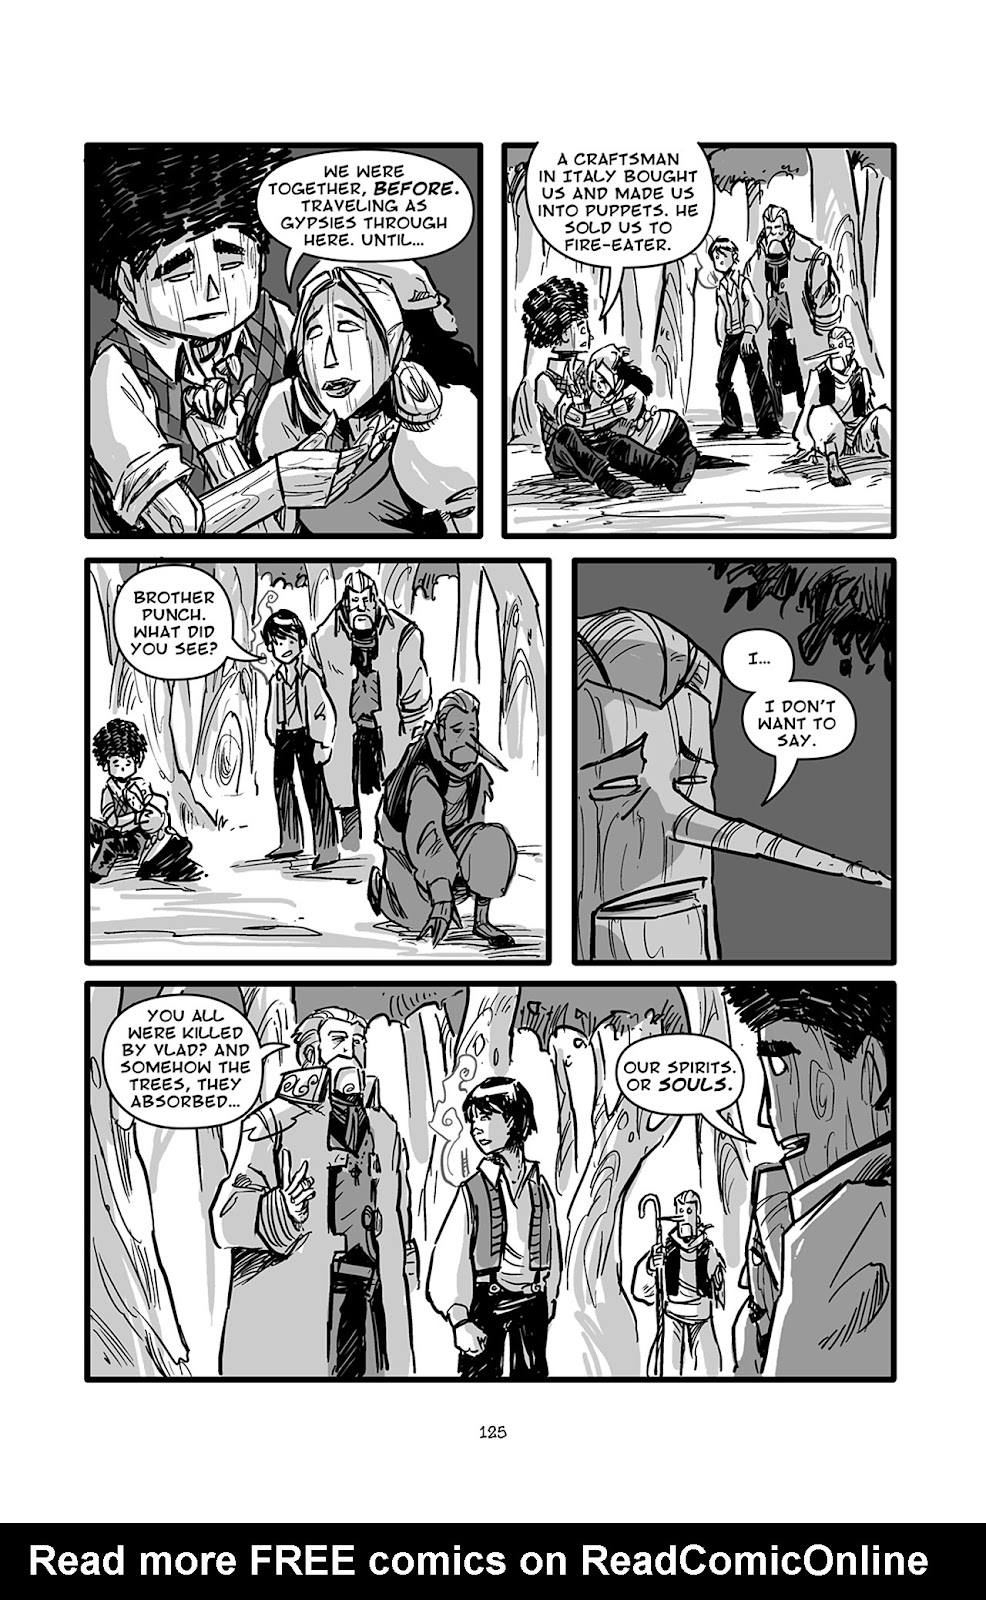 Pinocchio: Vampire Slayer - Of Wood and Blood issue 6 - Page 2